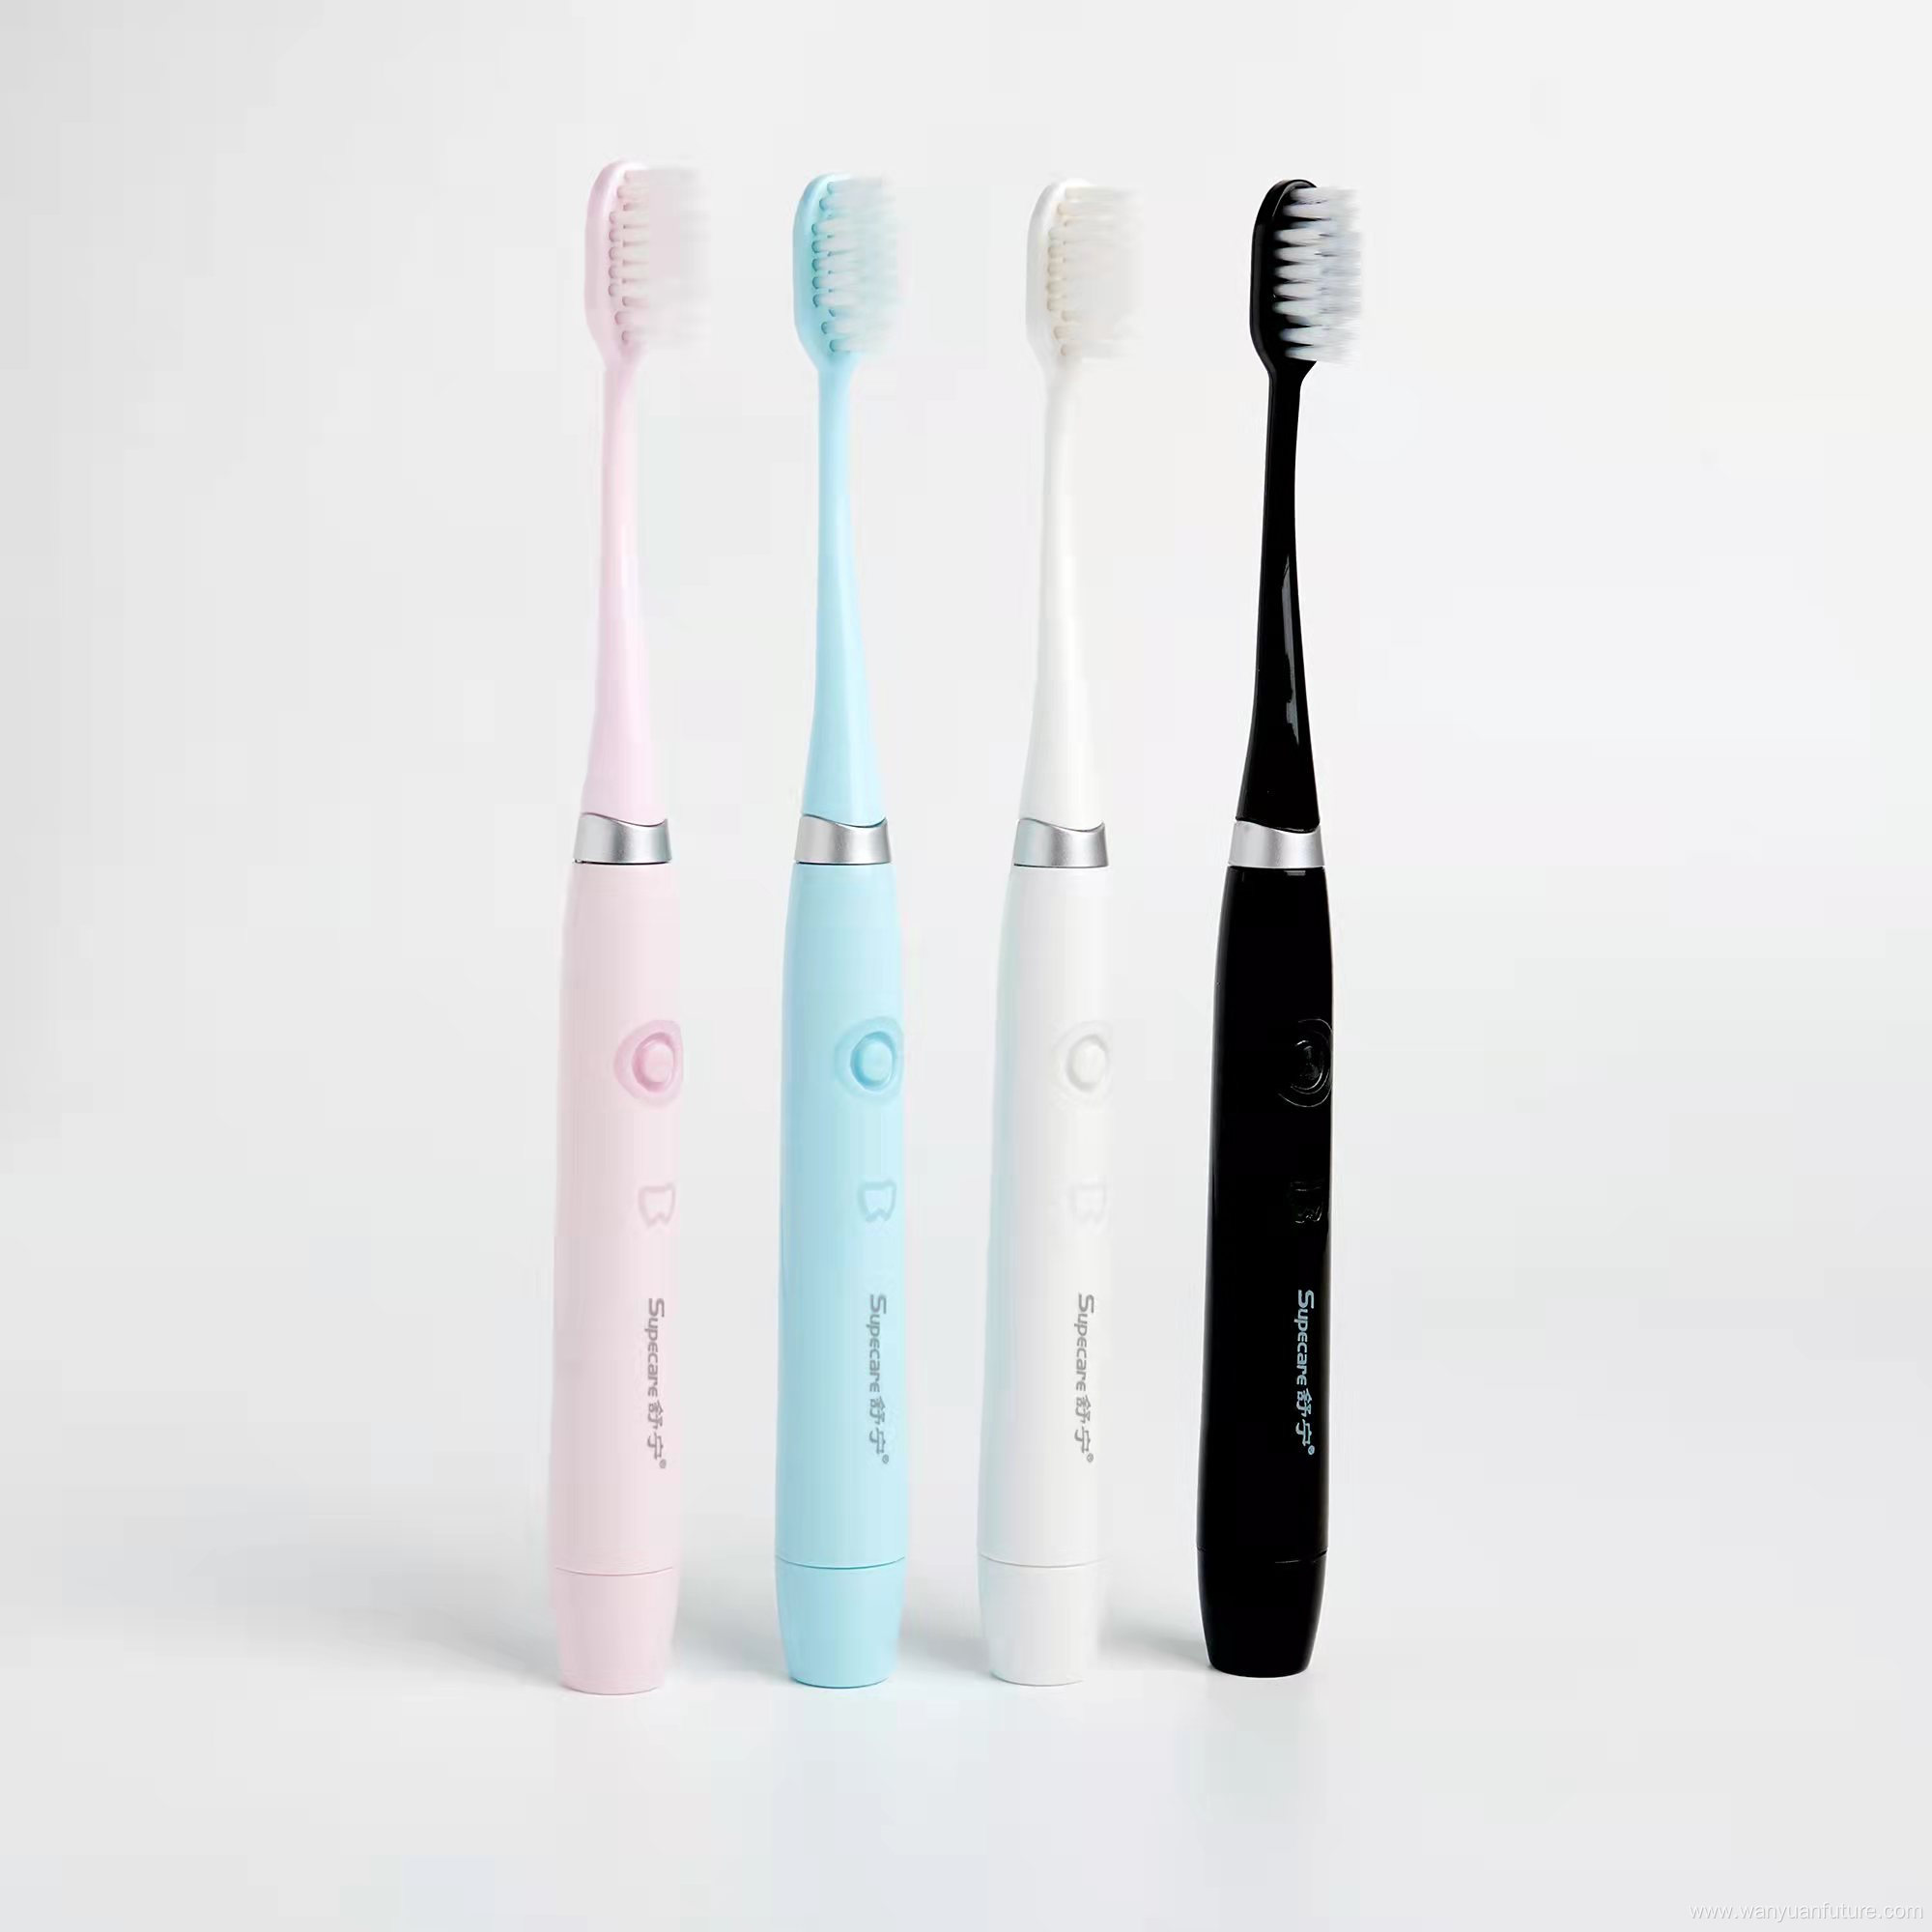 Portable travel sonic rechargeable toothbrush